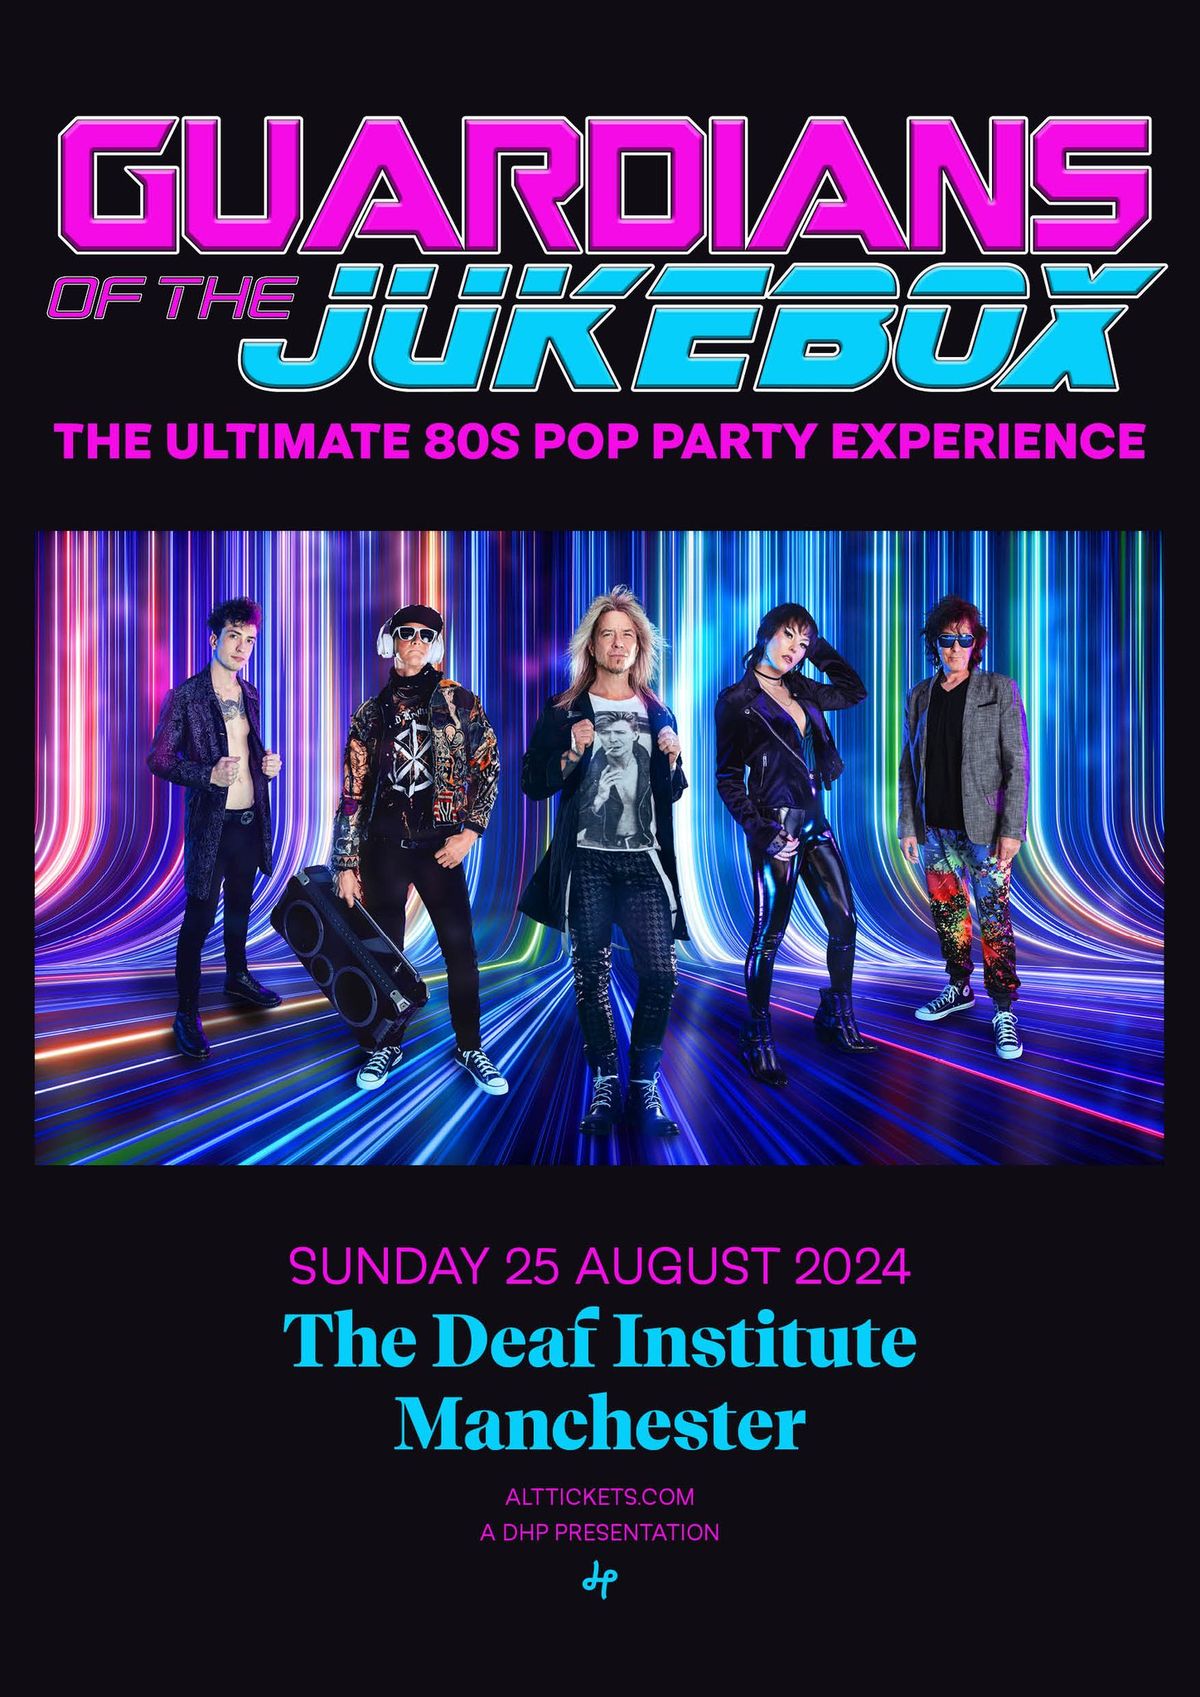 Guardians of the Jukebox live at The Deaf Institute Manchester